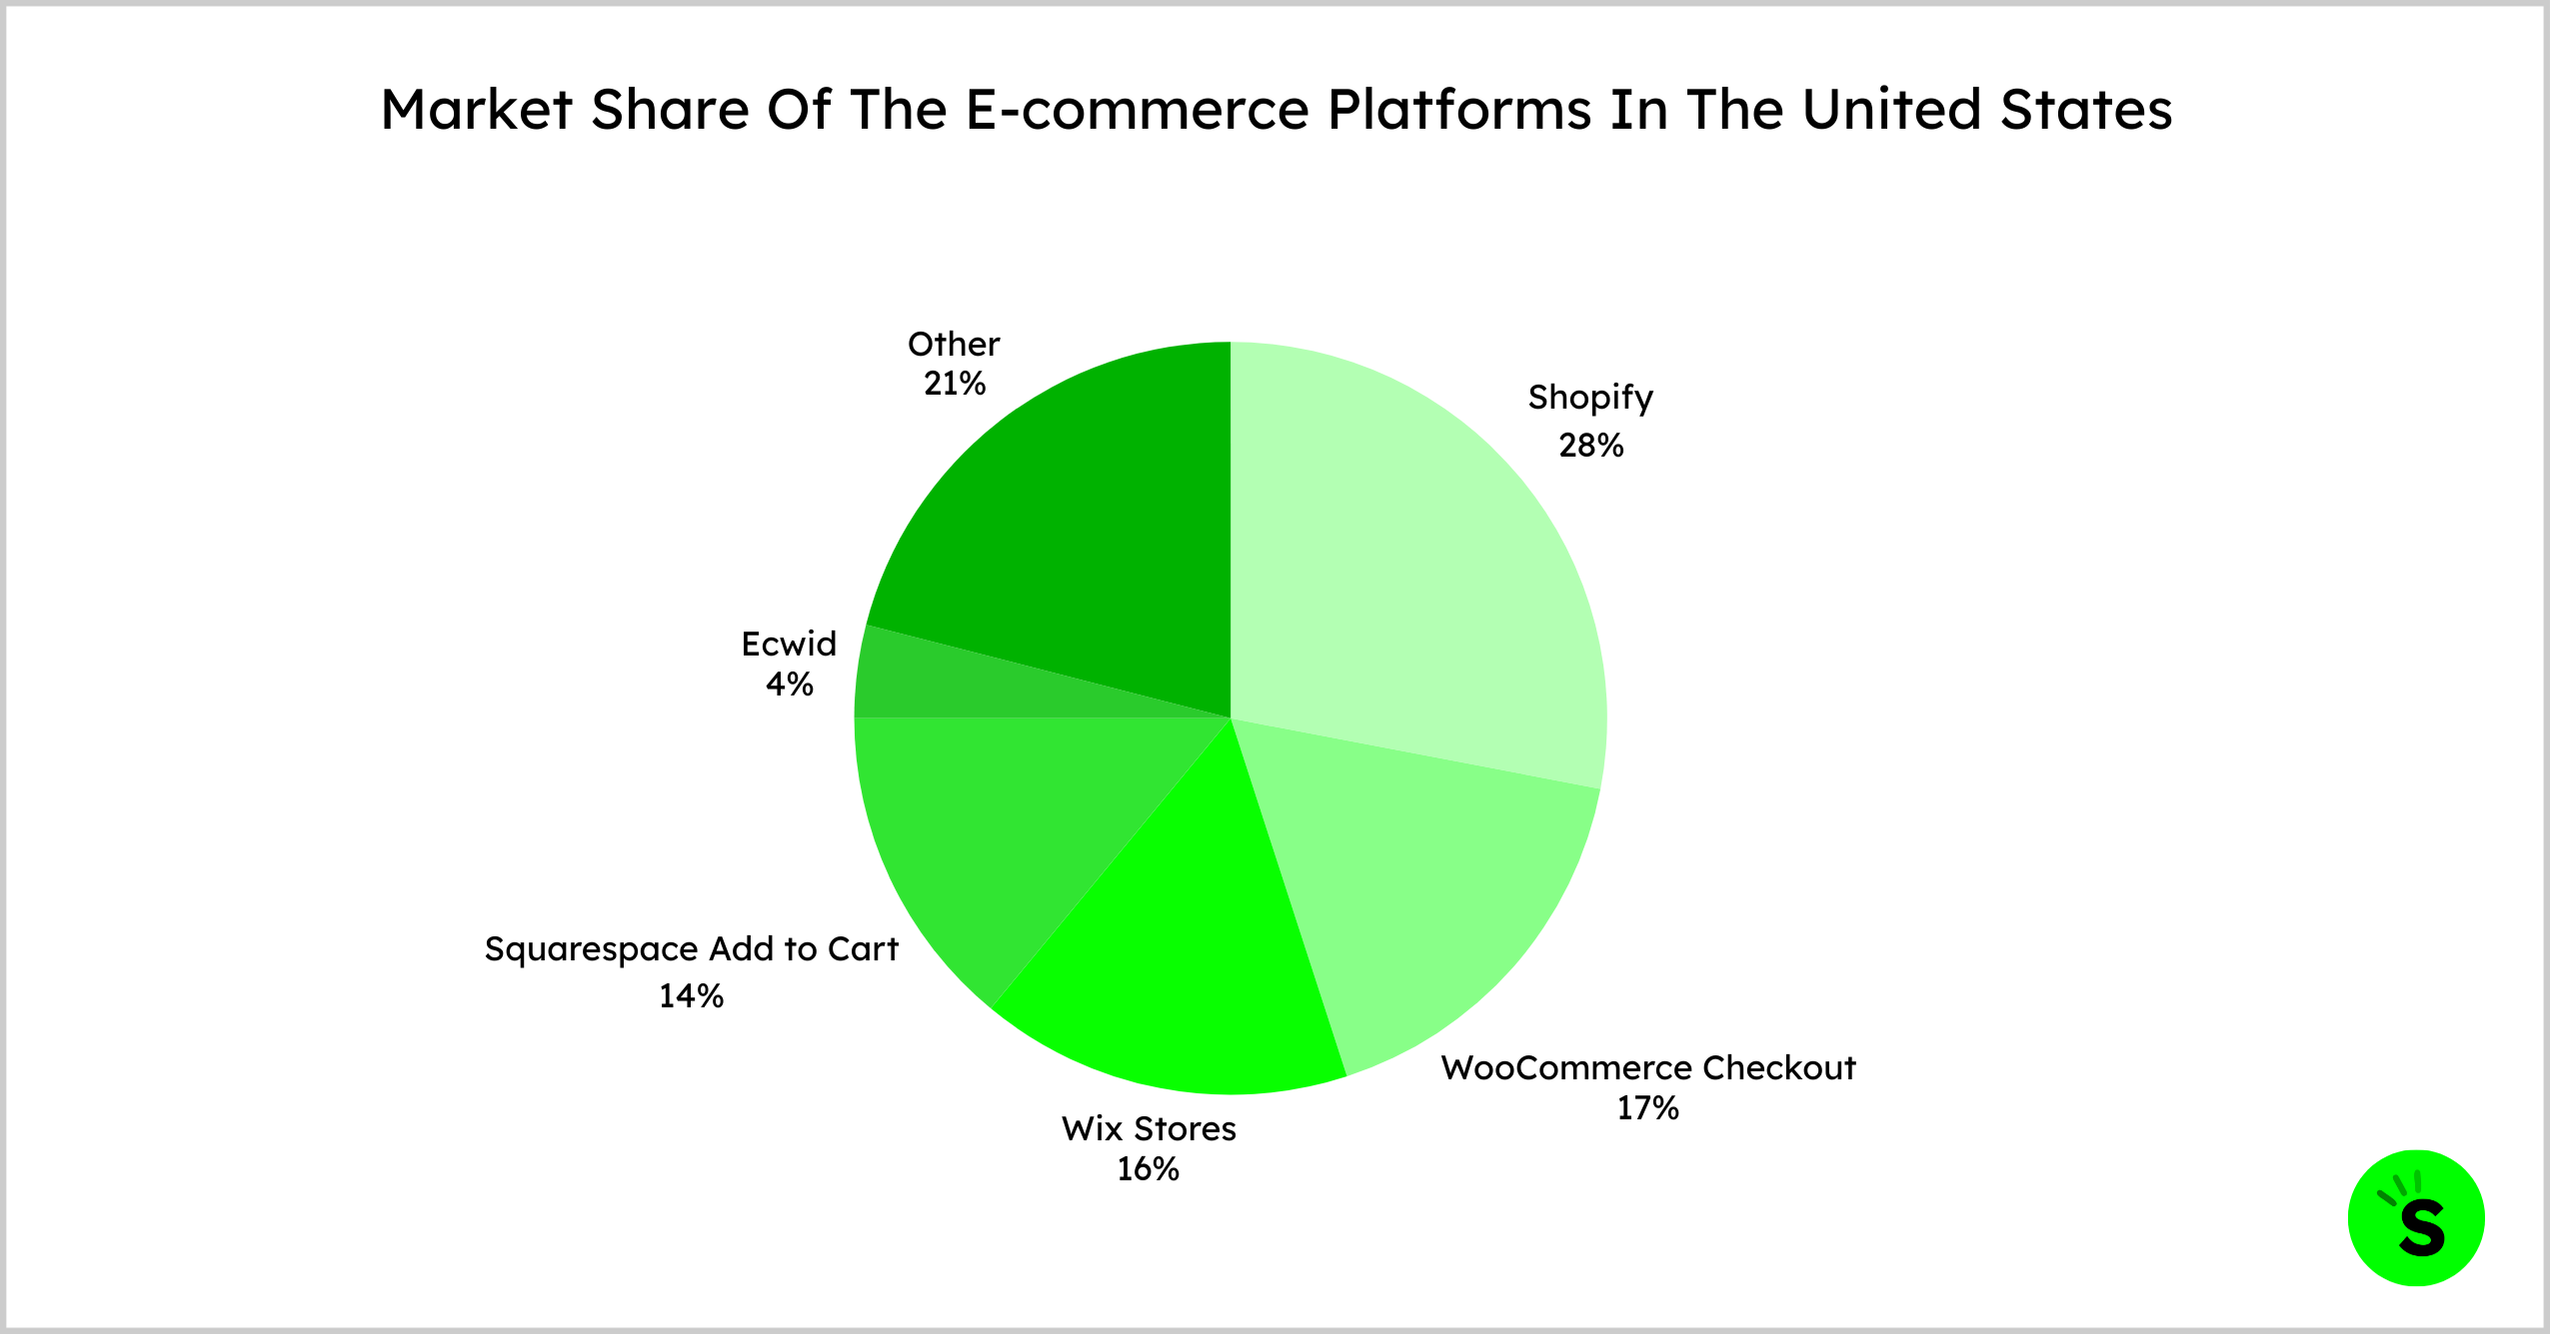 Market Share Of The E-commerce Platforms In The US